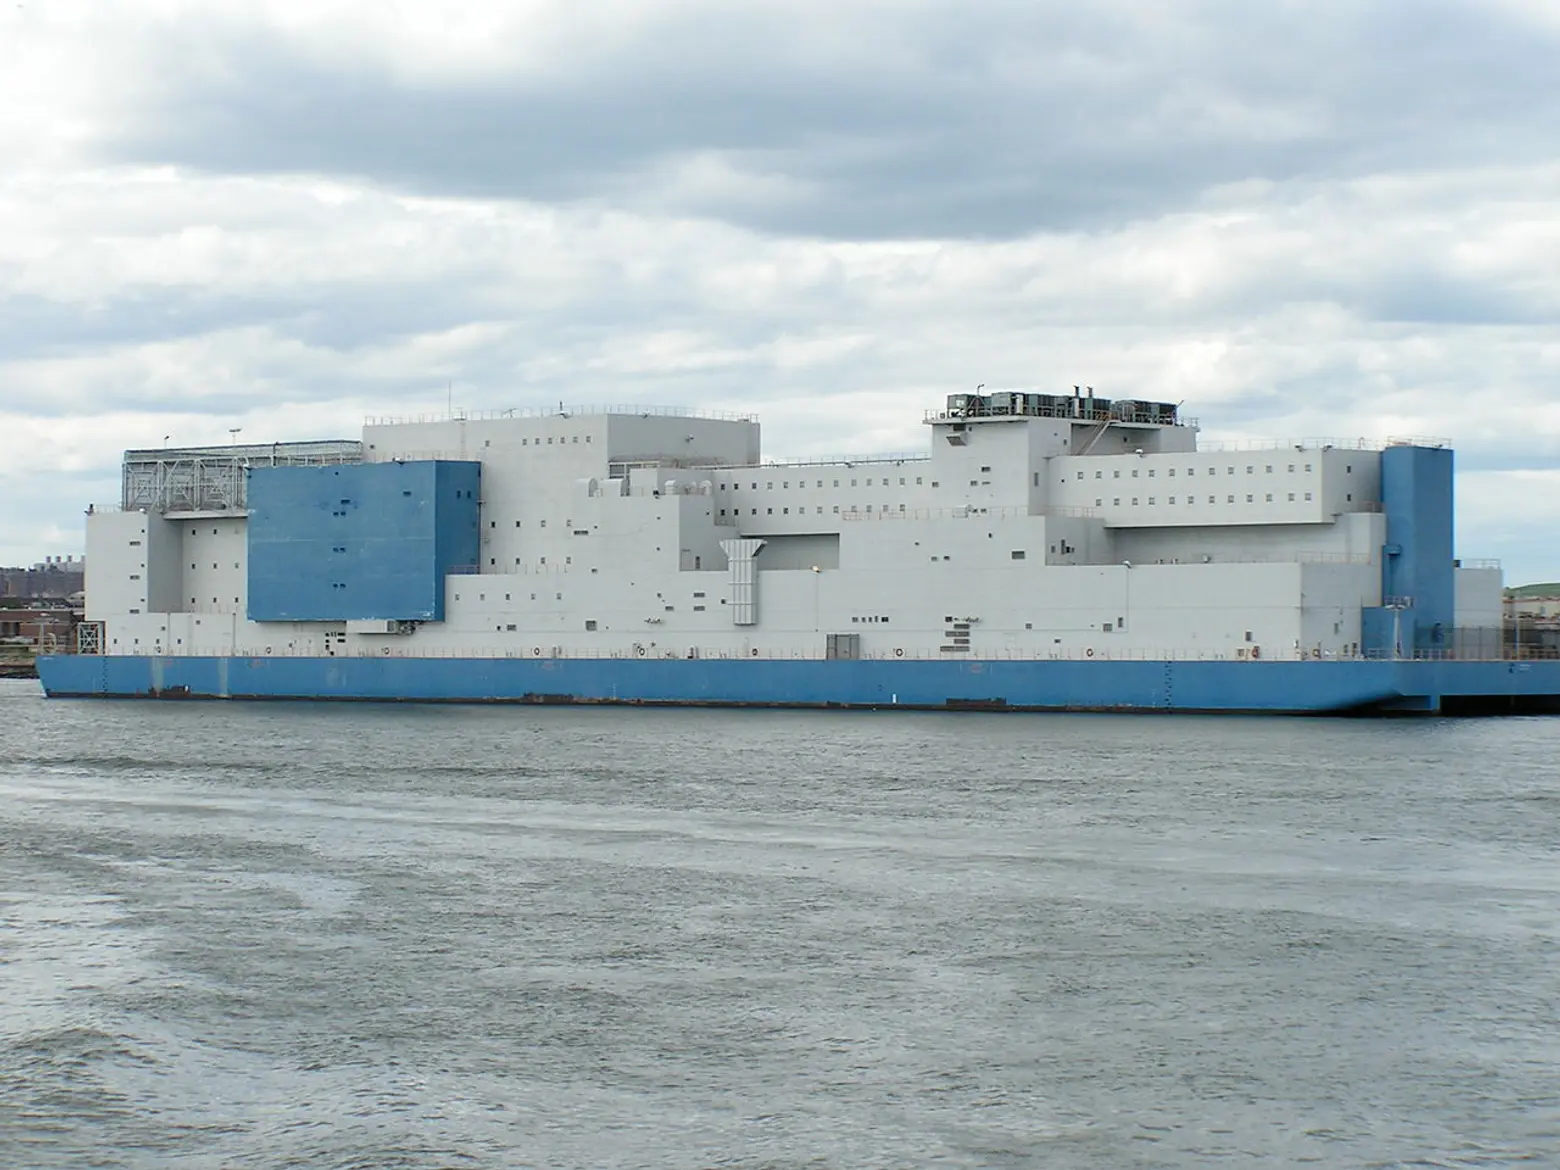 The East River prison barge, intended to be temporary, draws ire amid plans to close Rikers